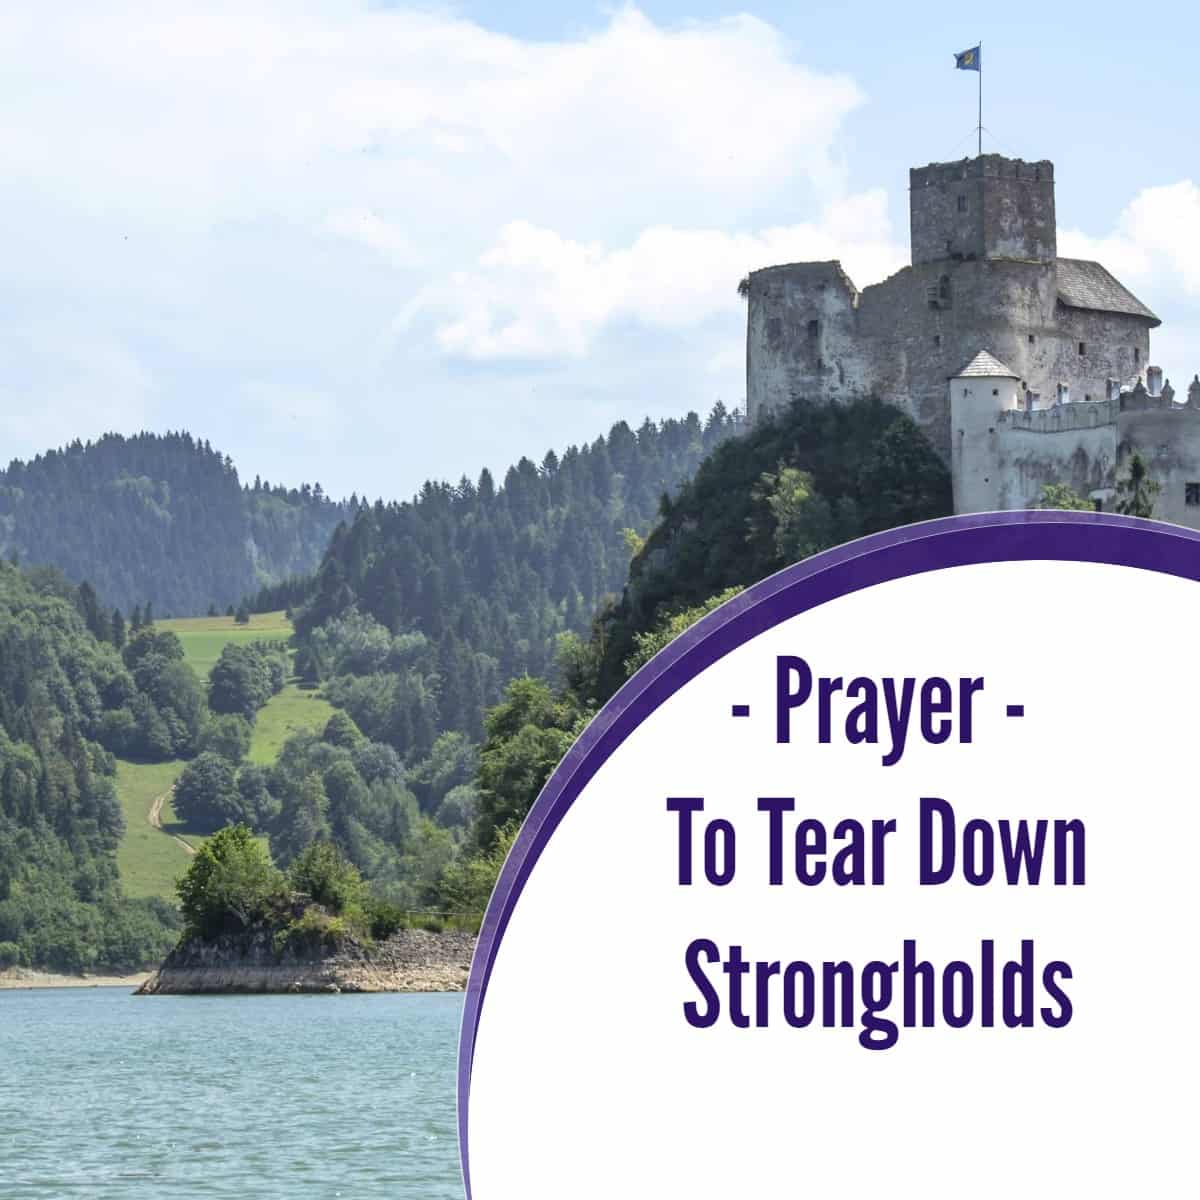 Strongholds: Powerful Prayer To Tear Them Down